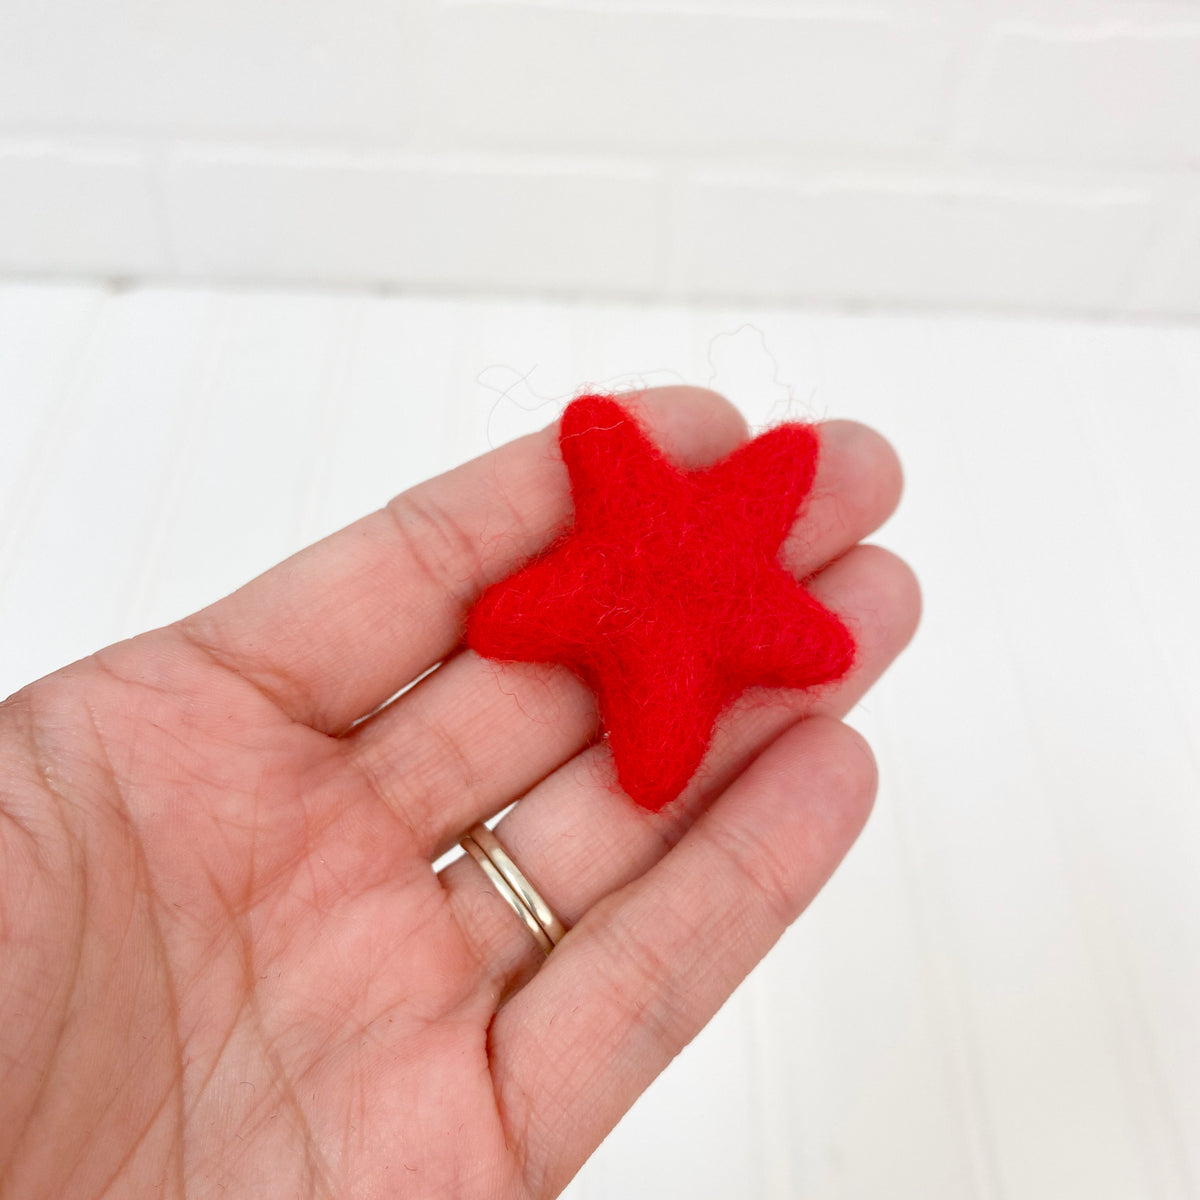 1.75" Felted Star - Red